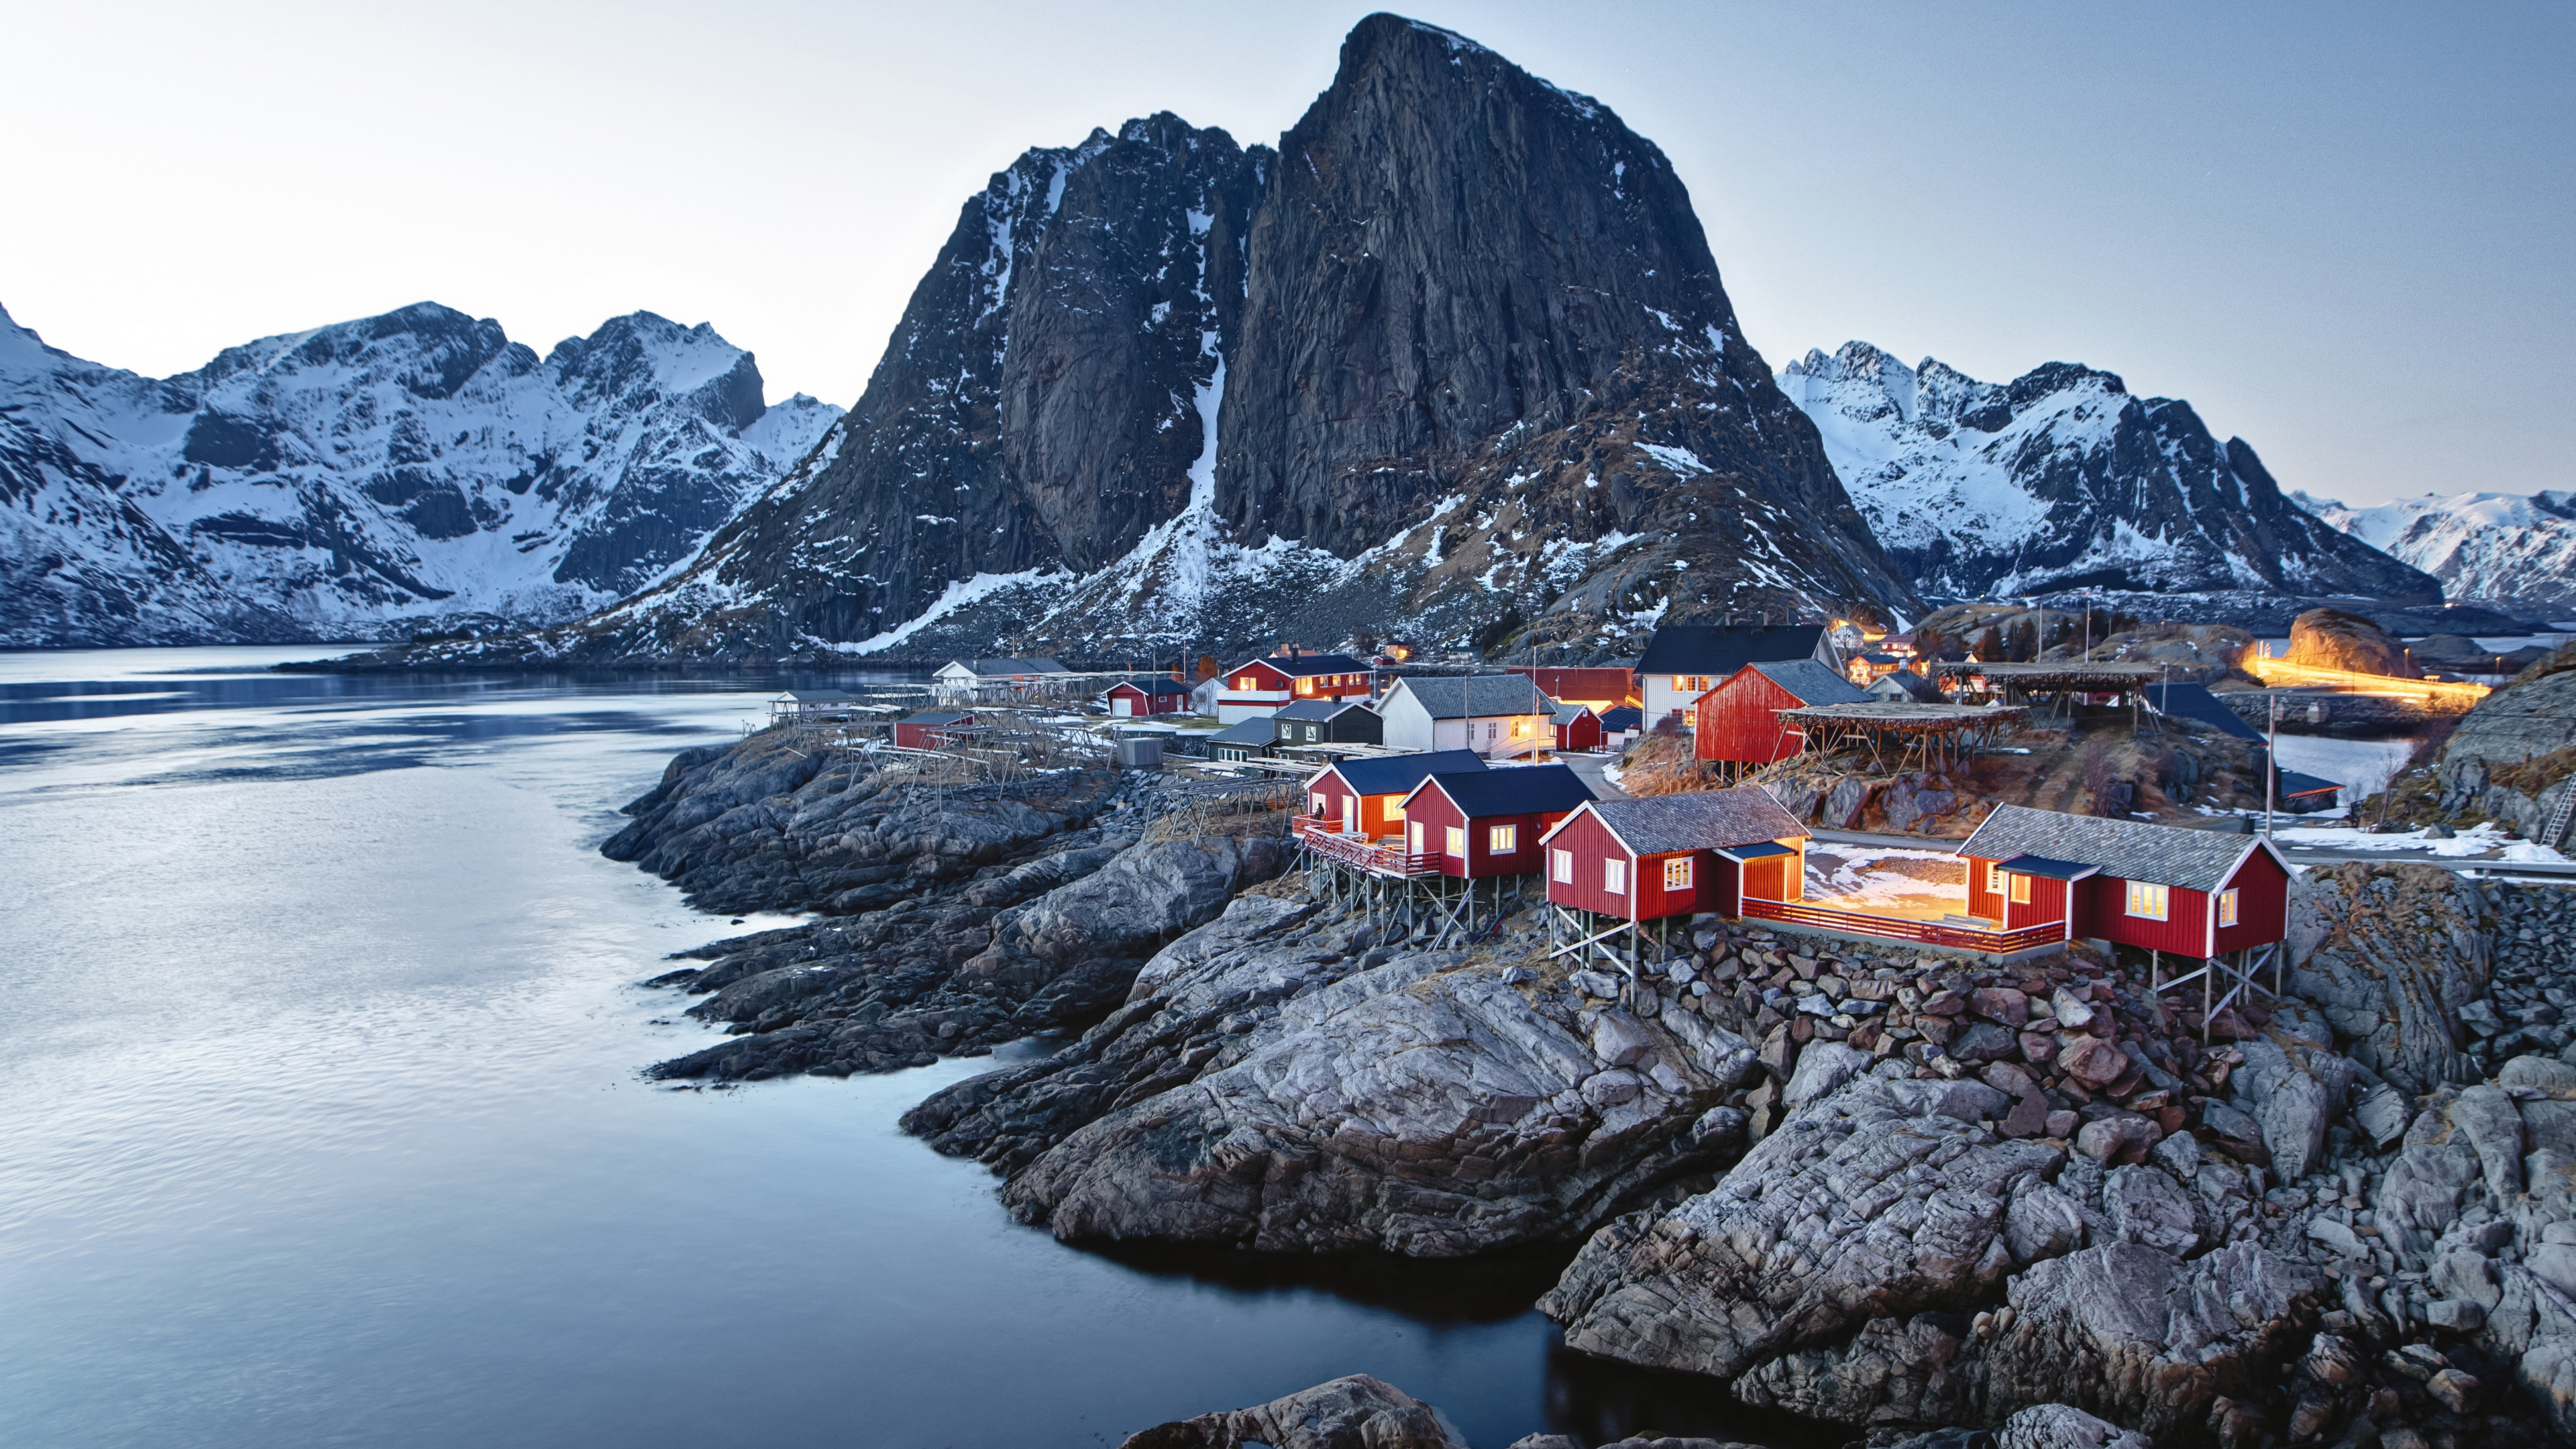 Town: Lofoten archipelago, A traditional fishermen's district in the county of Nordland, Norway. 3840x2160 4K Wallpaper.